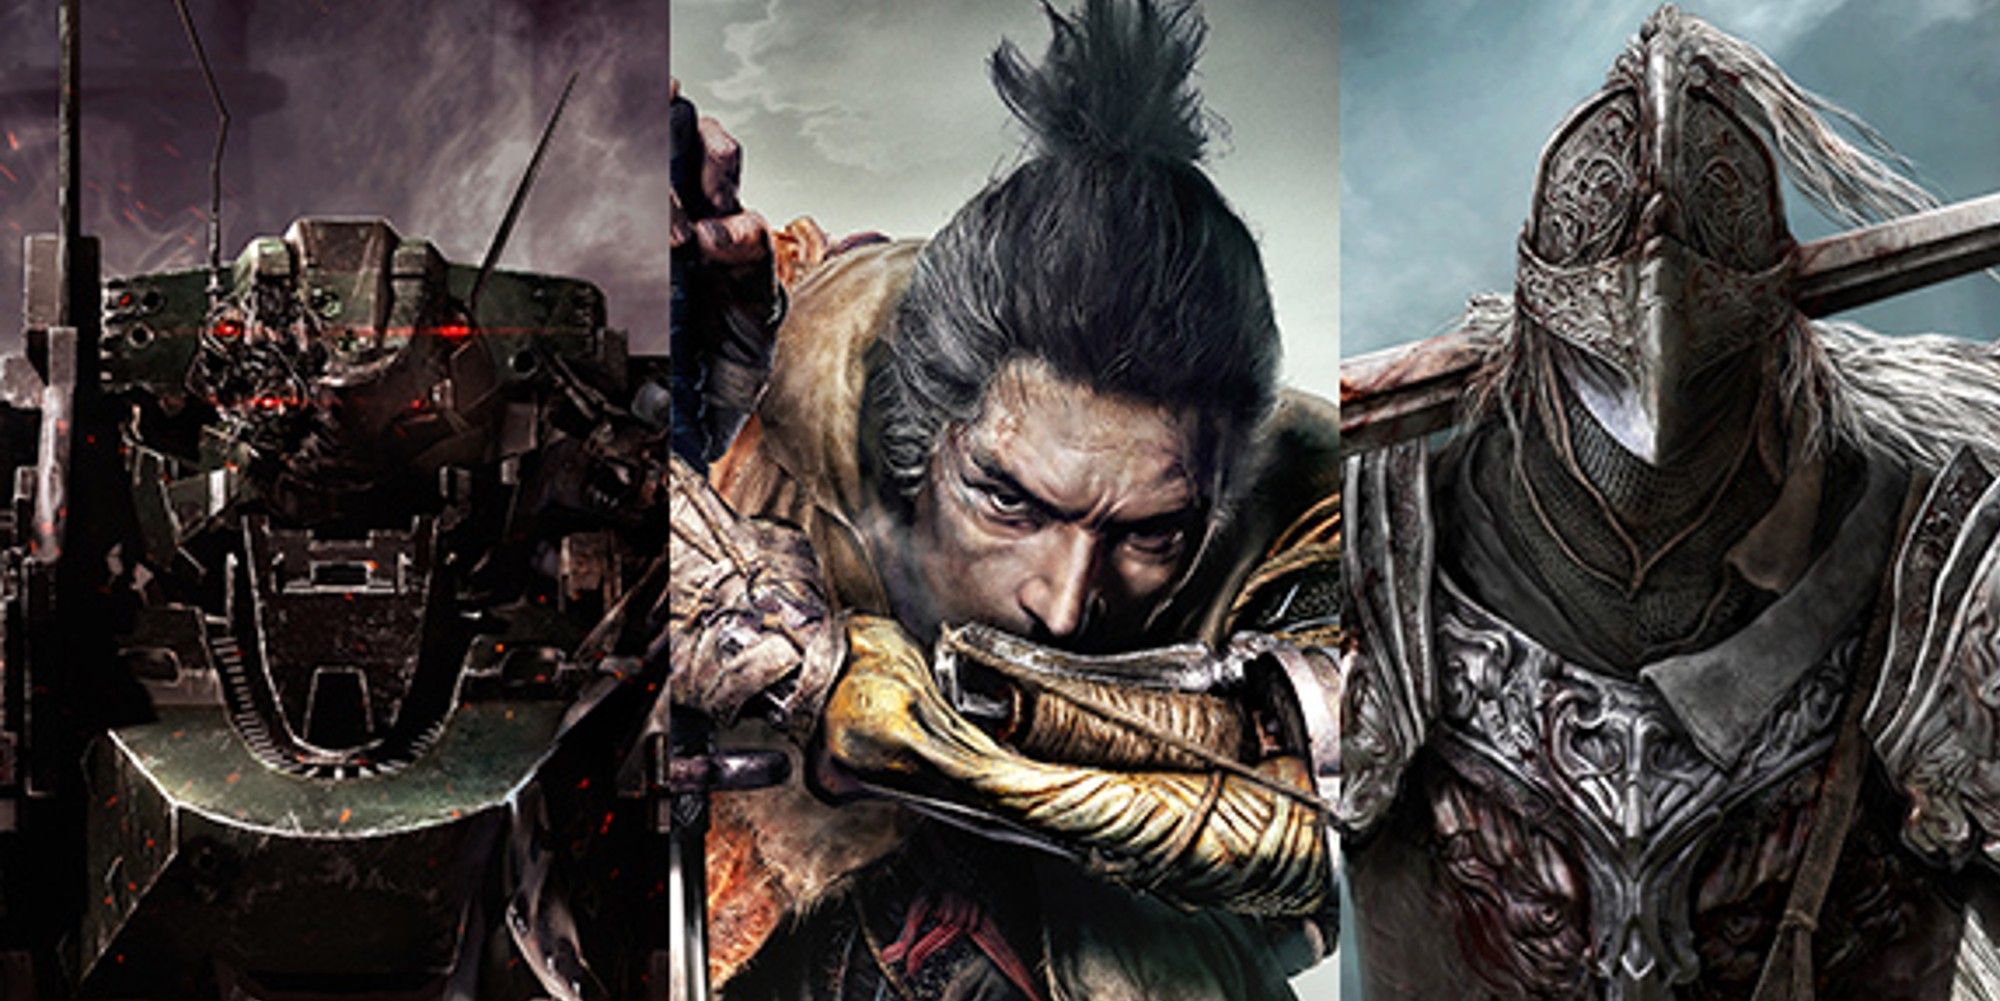 fromsoft games